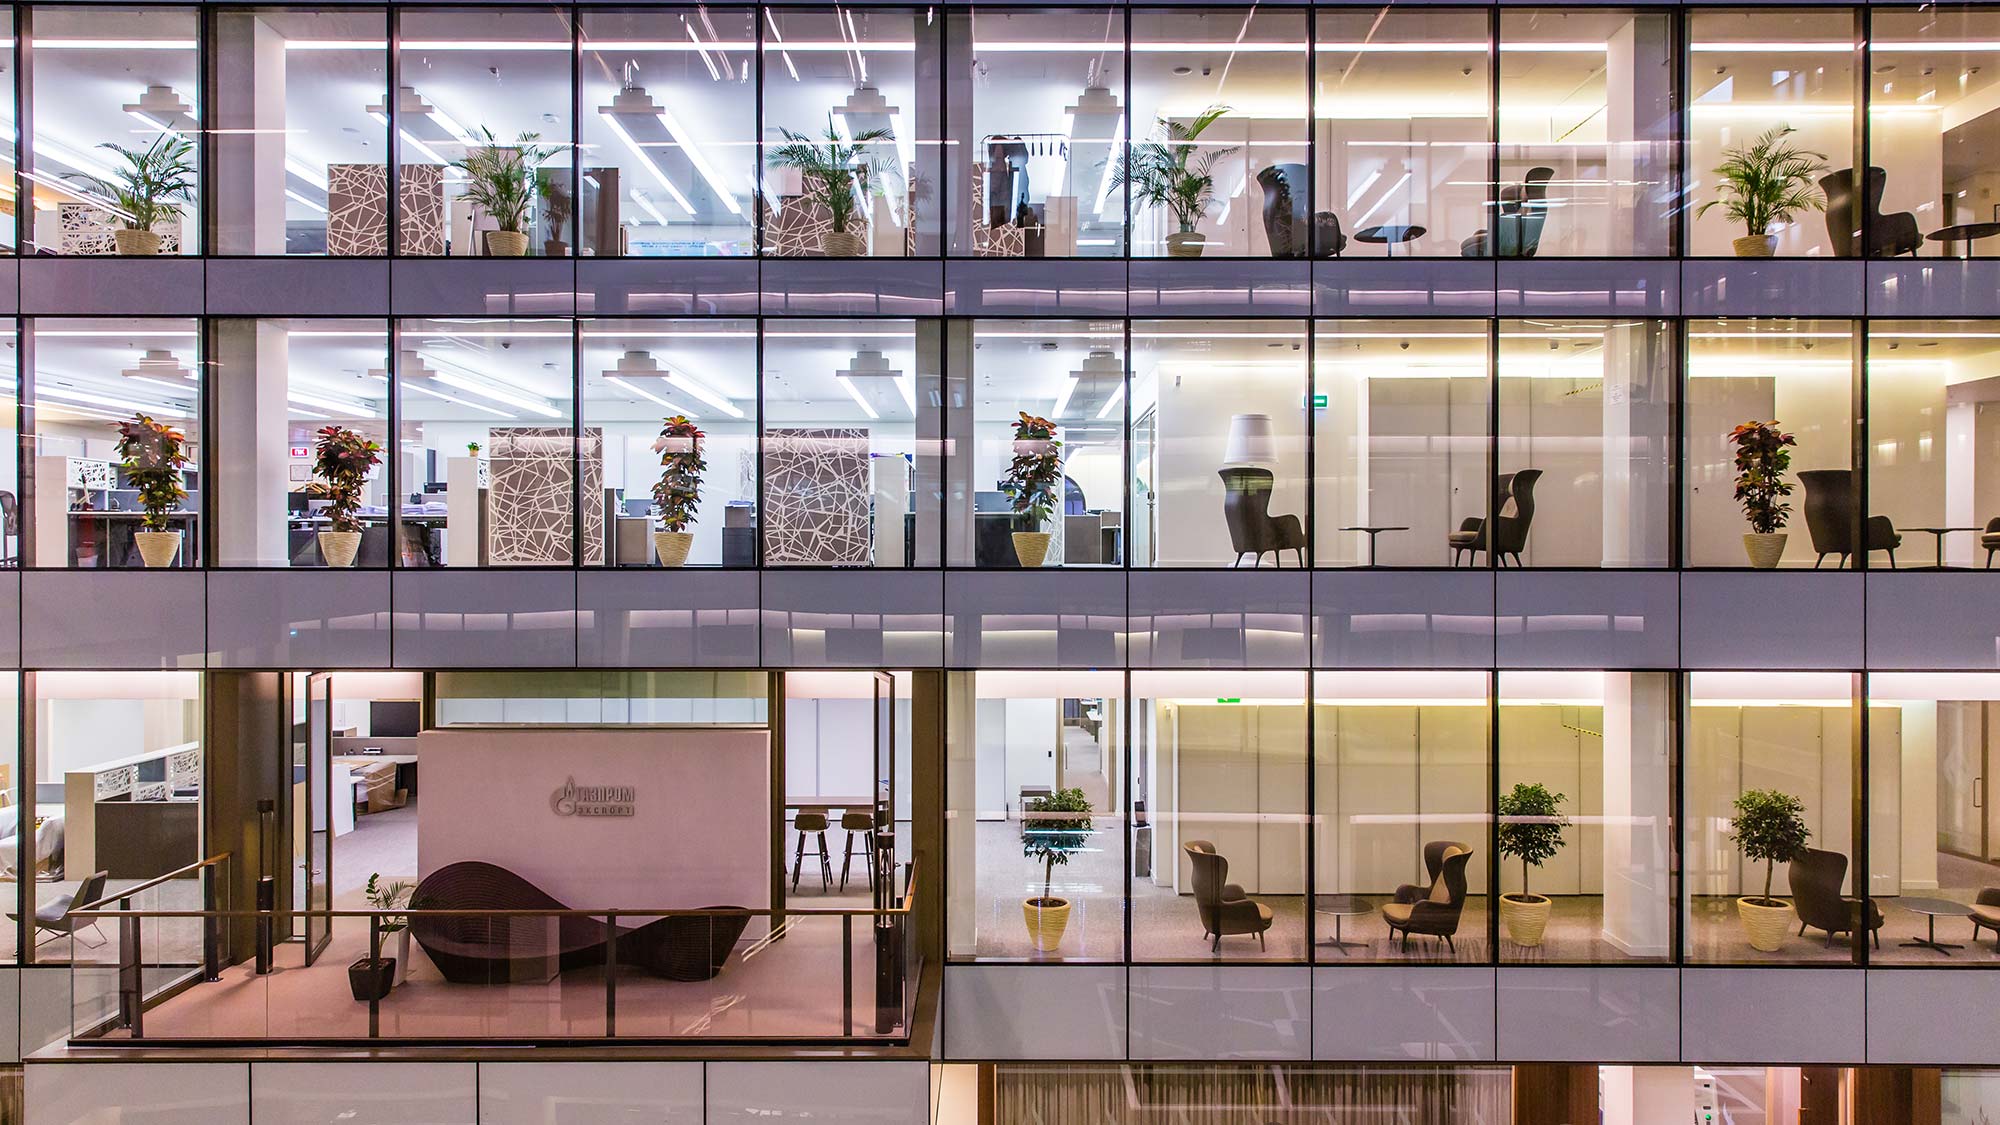 Office spaces behind large glass windows at St Petersburg headquarters